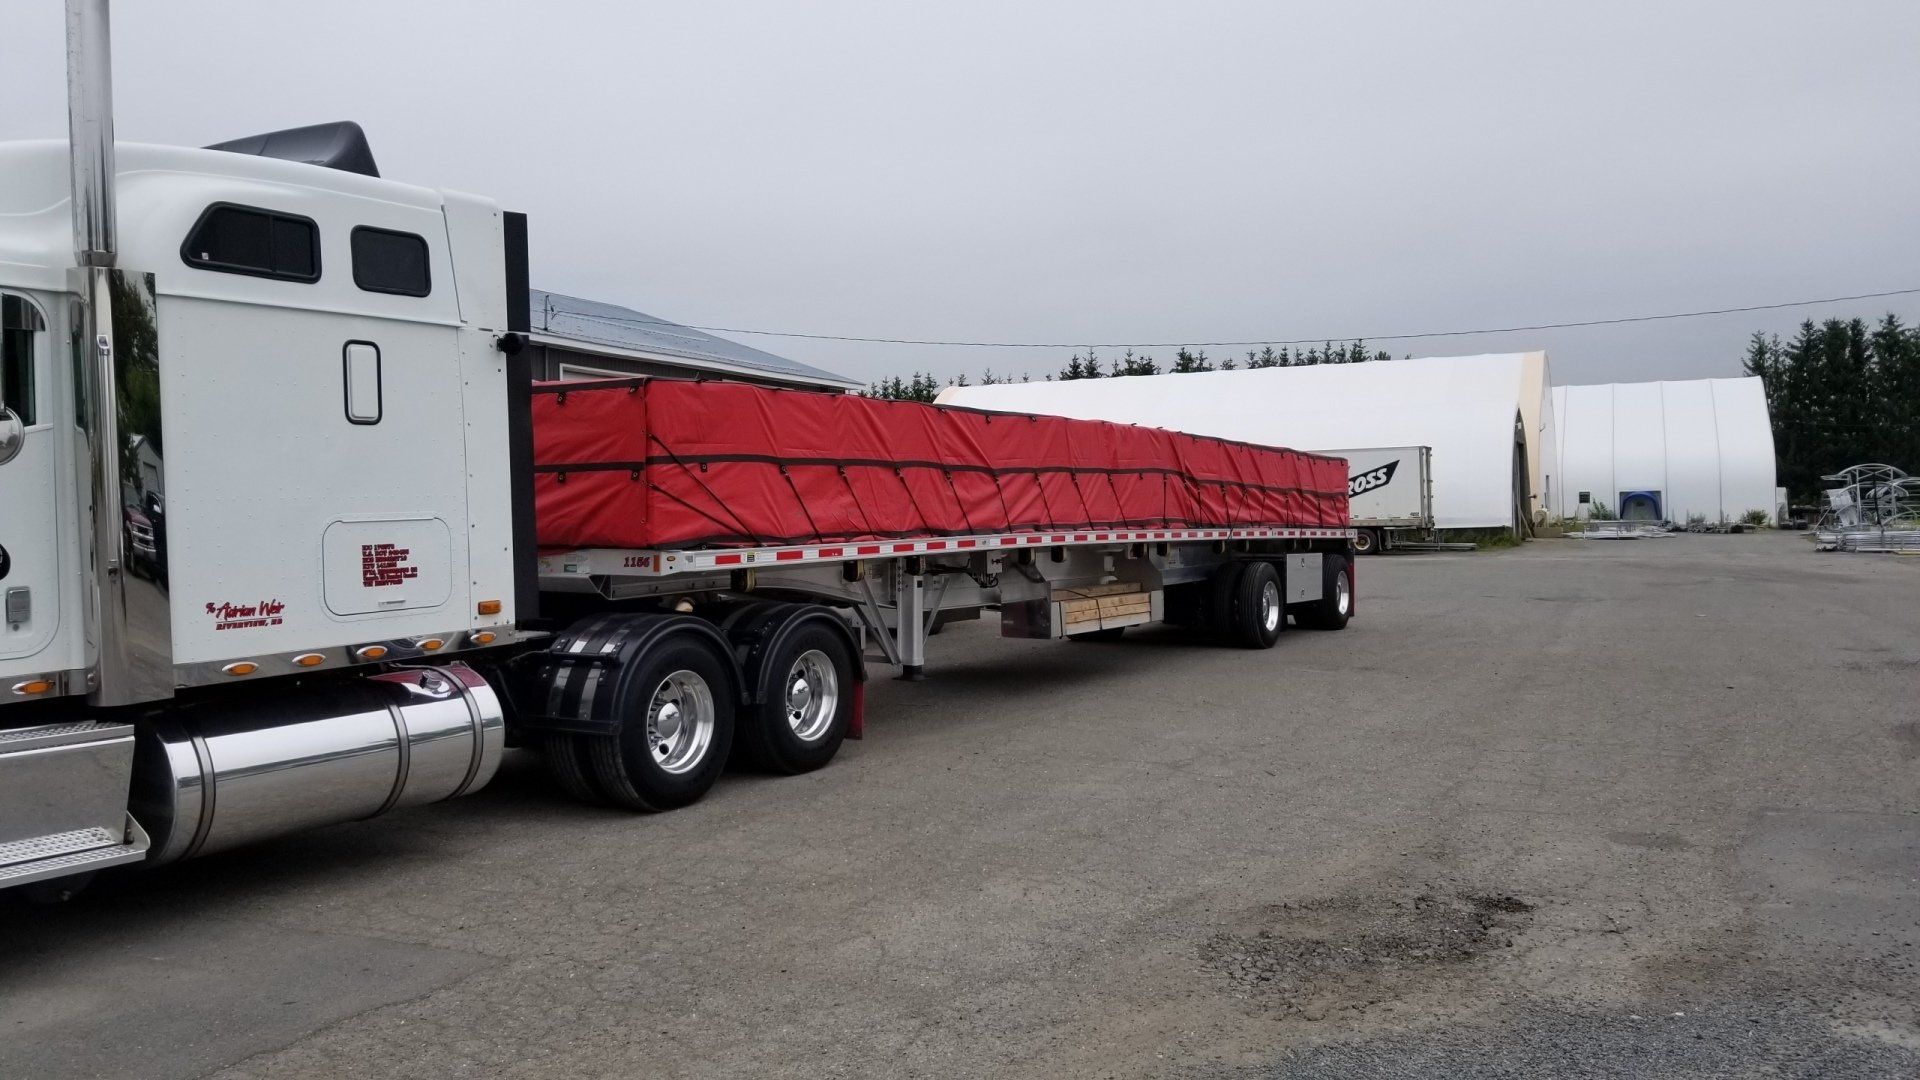 Wide selection of vinyl truck tarps at COVER-TECH